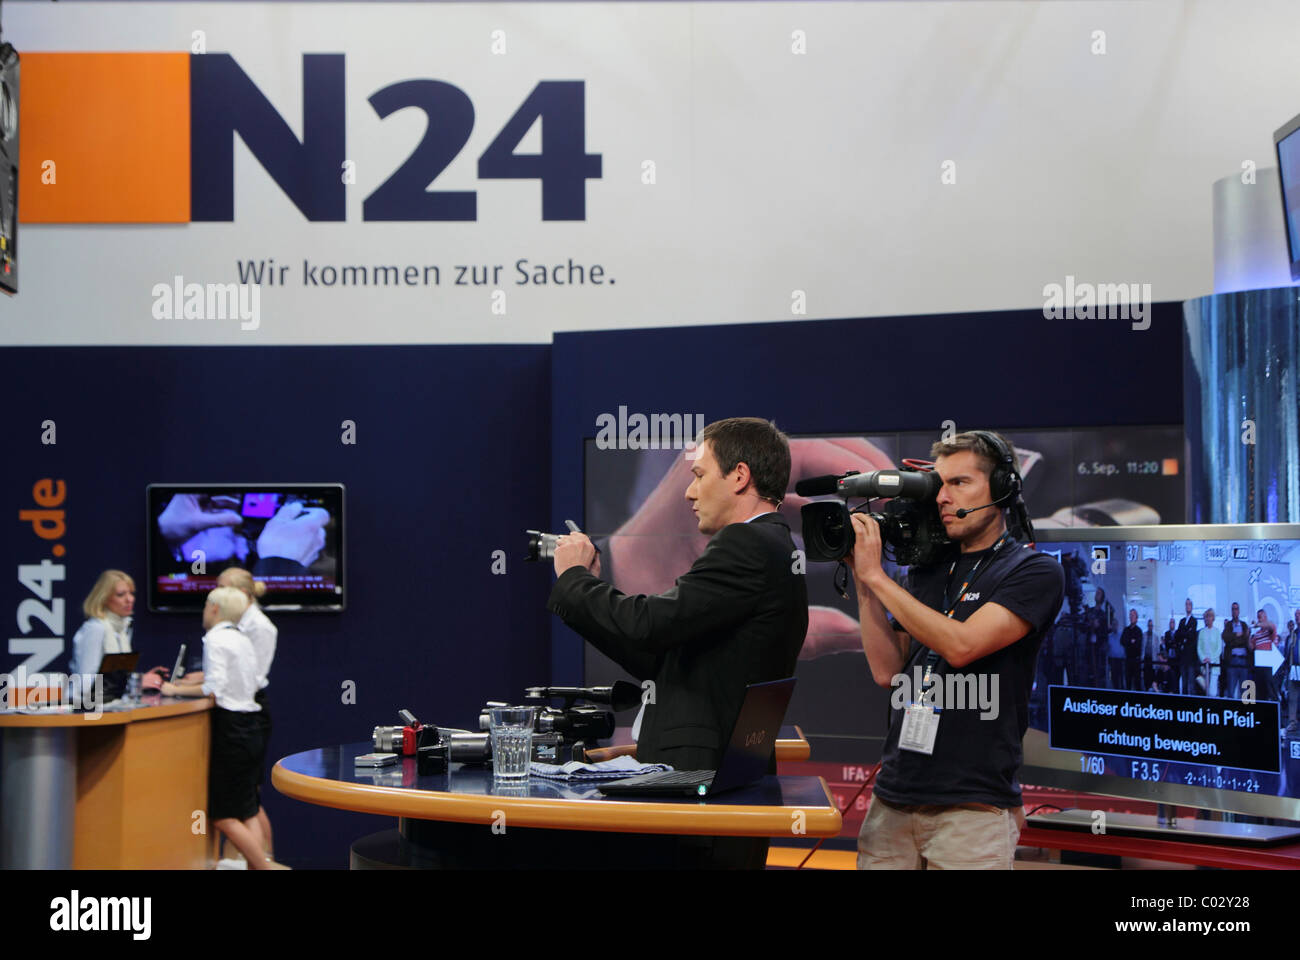 Live broadcast on the booth of the news channel N24, IFA Berlin 2010, Berlin, Germany, Europe Stock Photo